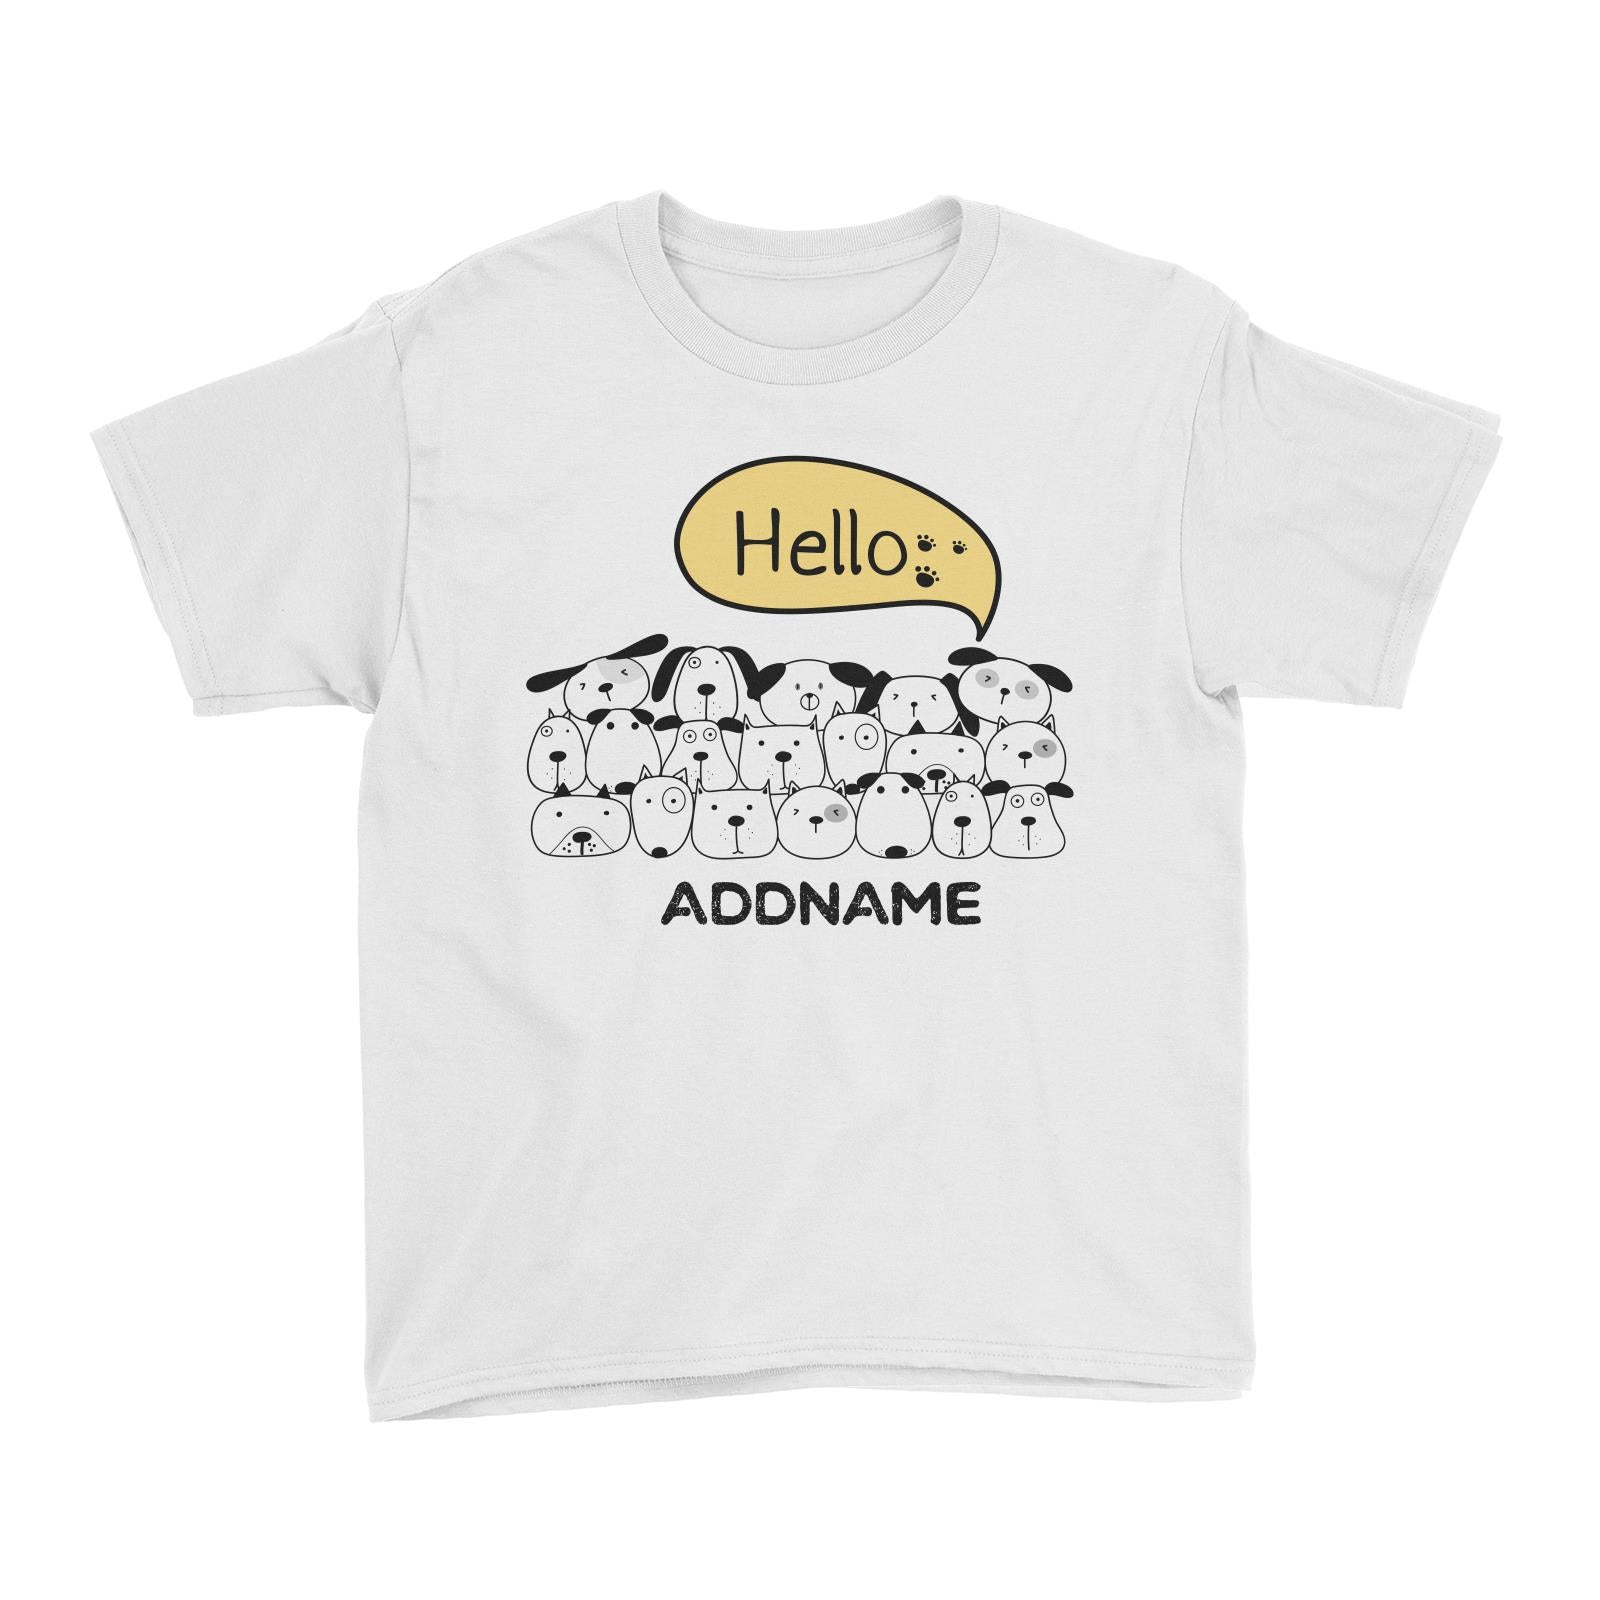 Cute Animals And Friends Series Hello Dogs Group Addname Kid's T-Shirt